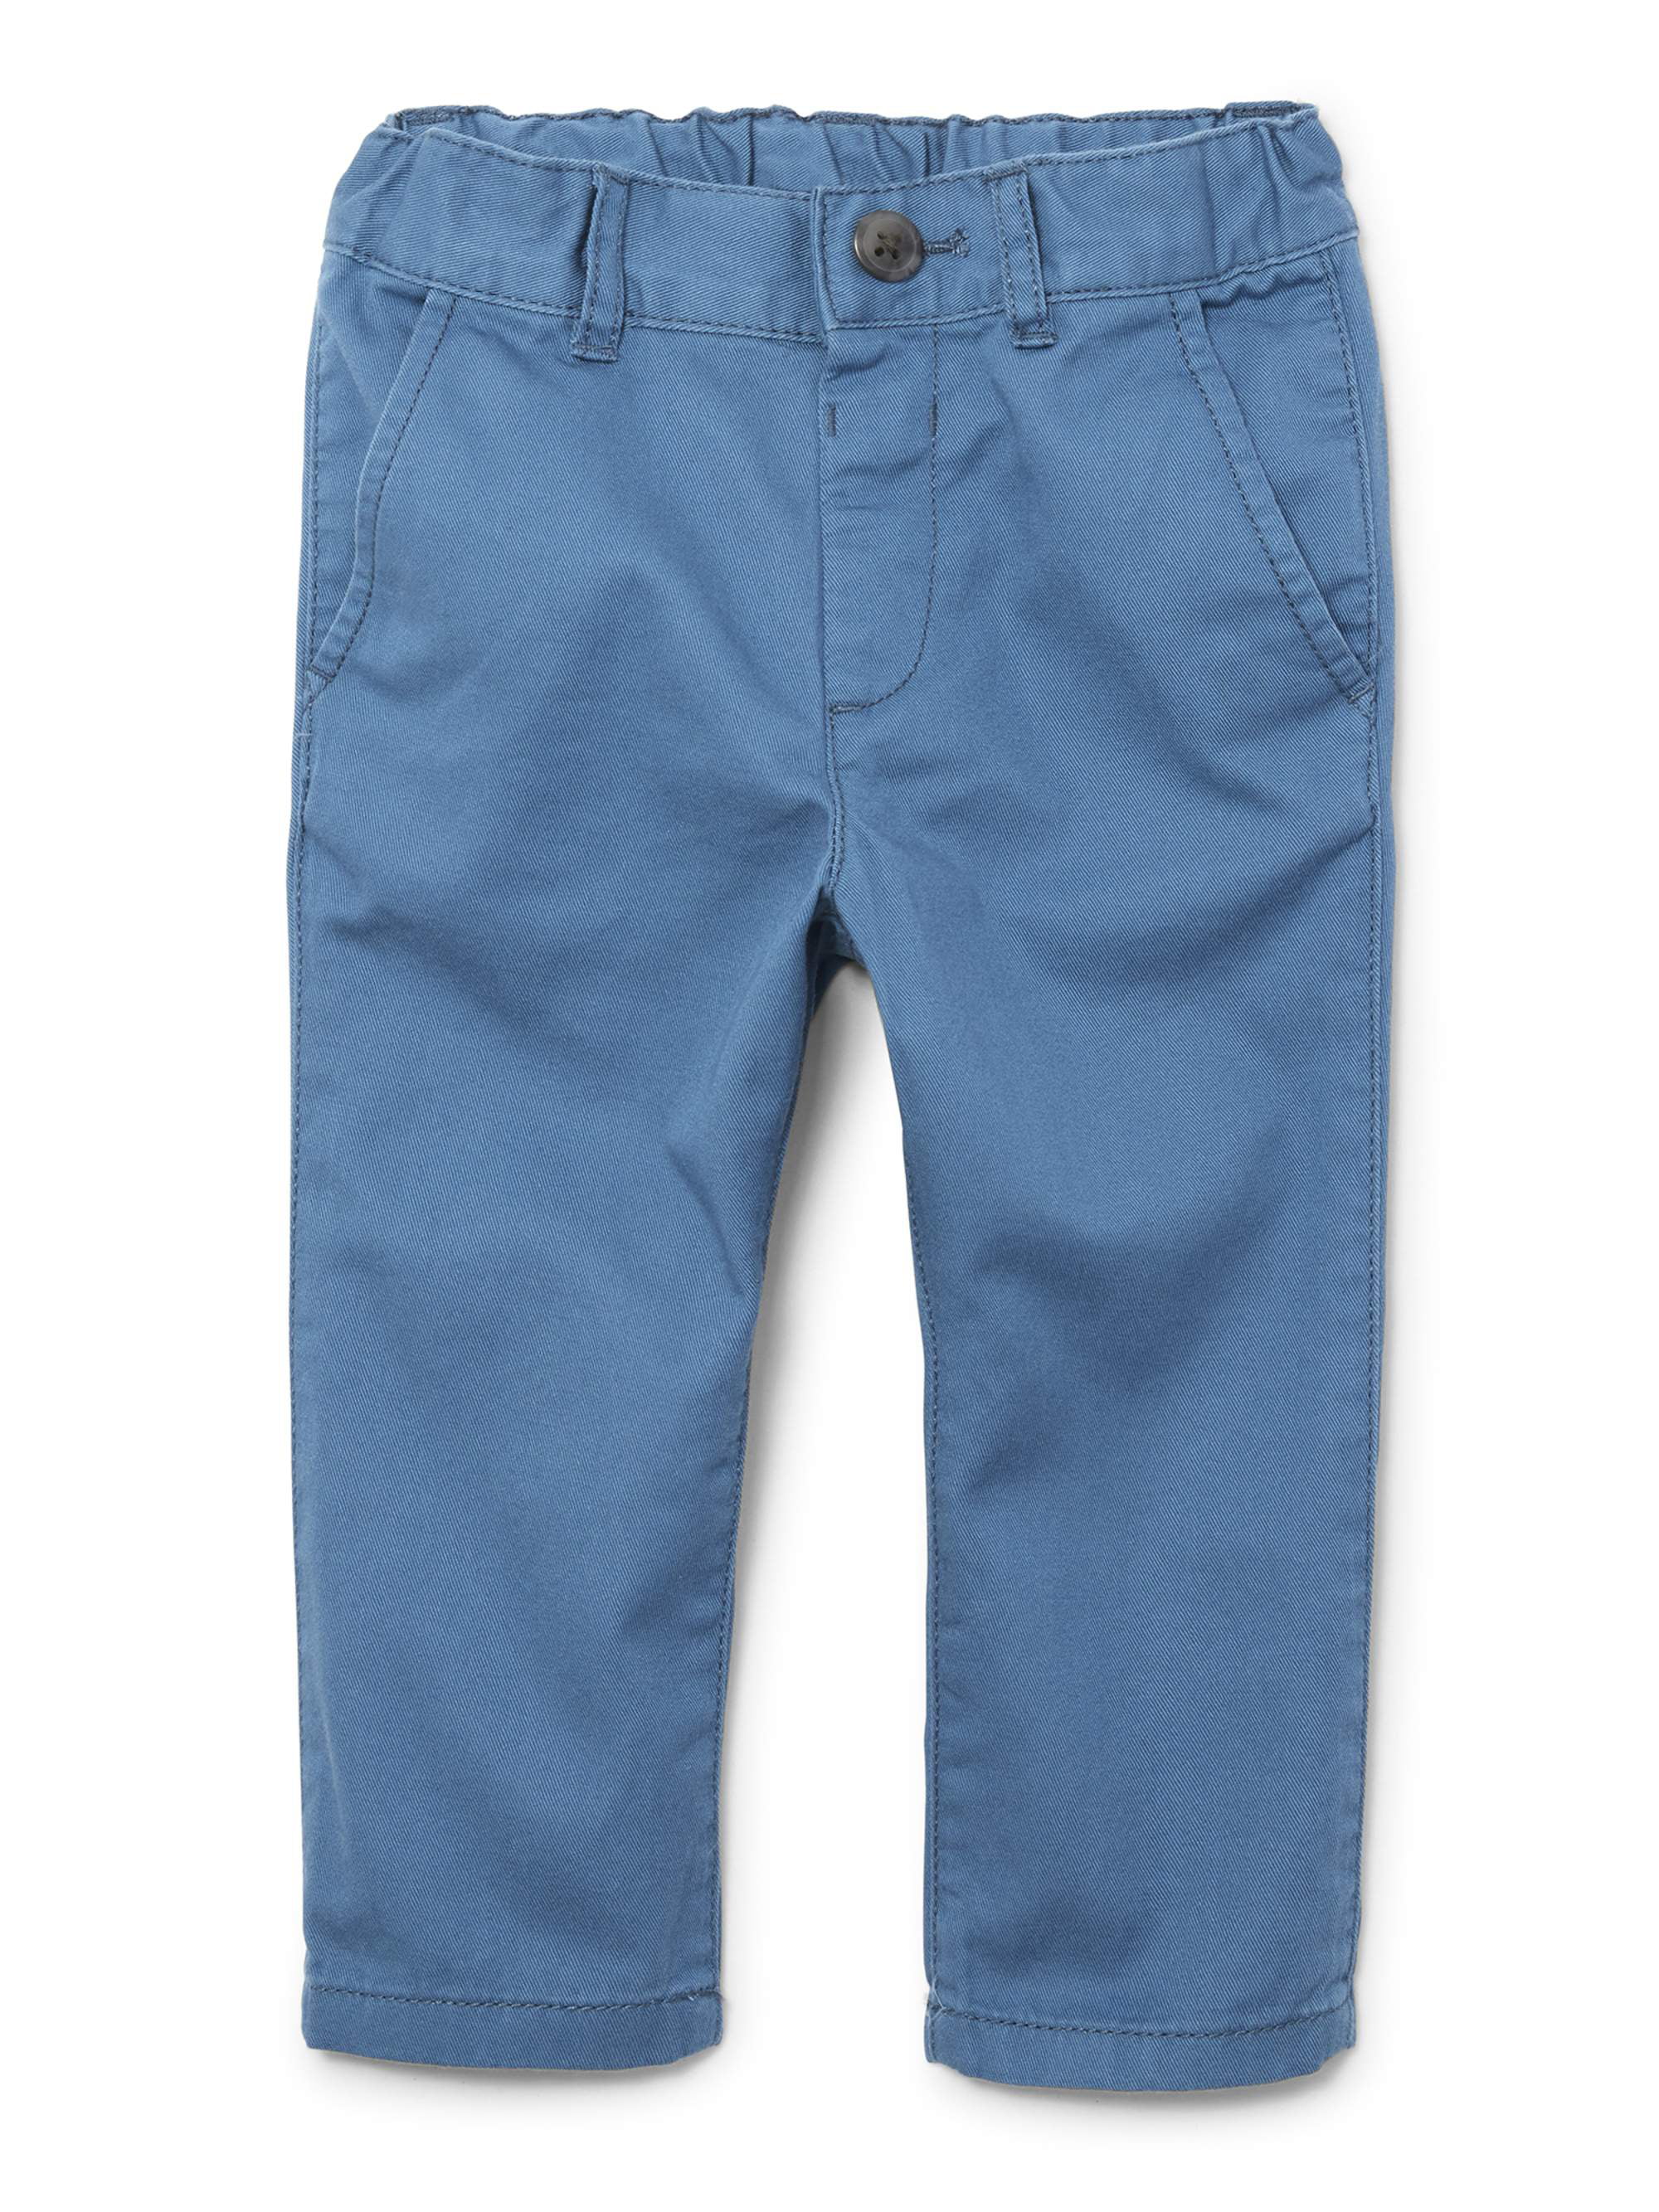 The Childrens Place Baby Boys Chino Pants Saver Prices Make Sure You ...